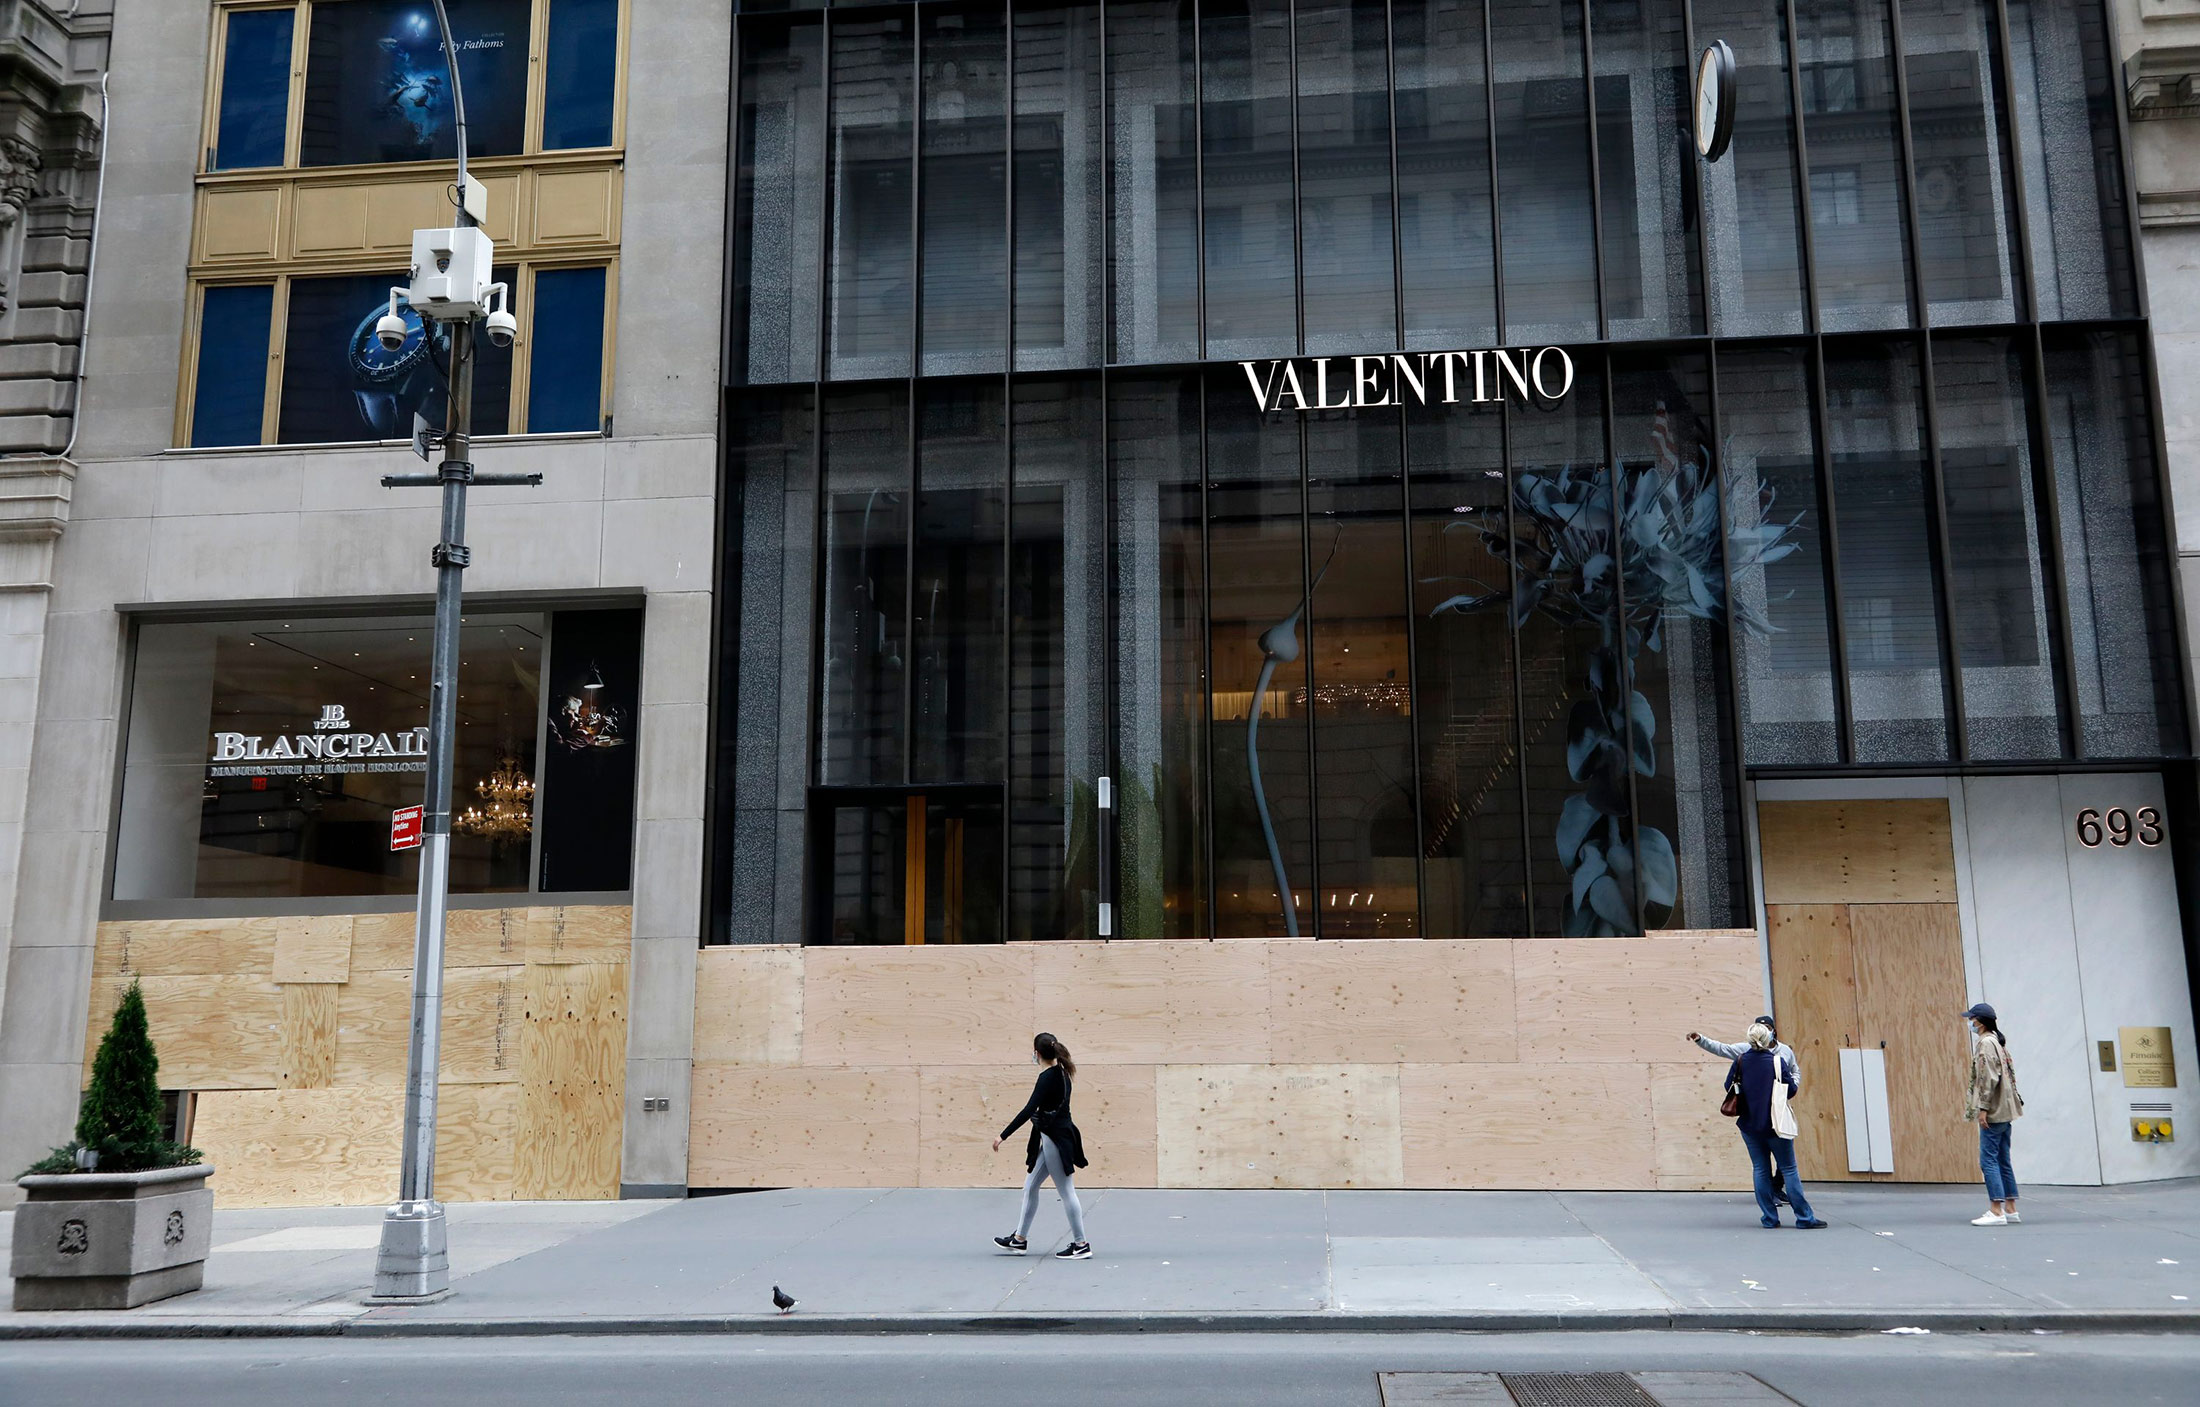 Valentino Sues to End Amid Pandemic Losses - Bloomberg